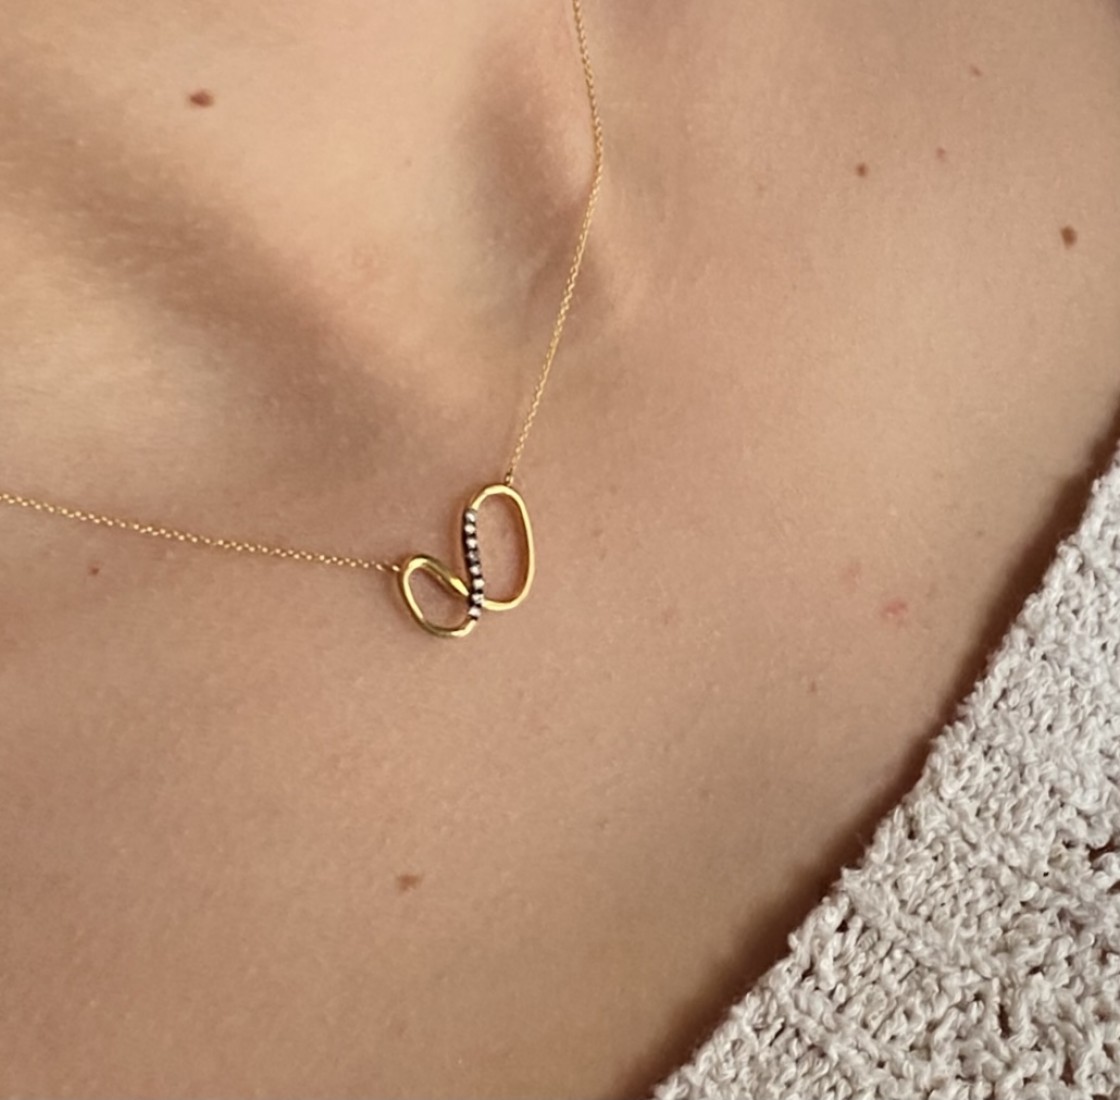 Small gold infinity charm inlaid with white brilliant cut diamonds, delicate gold chain.